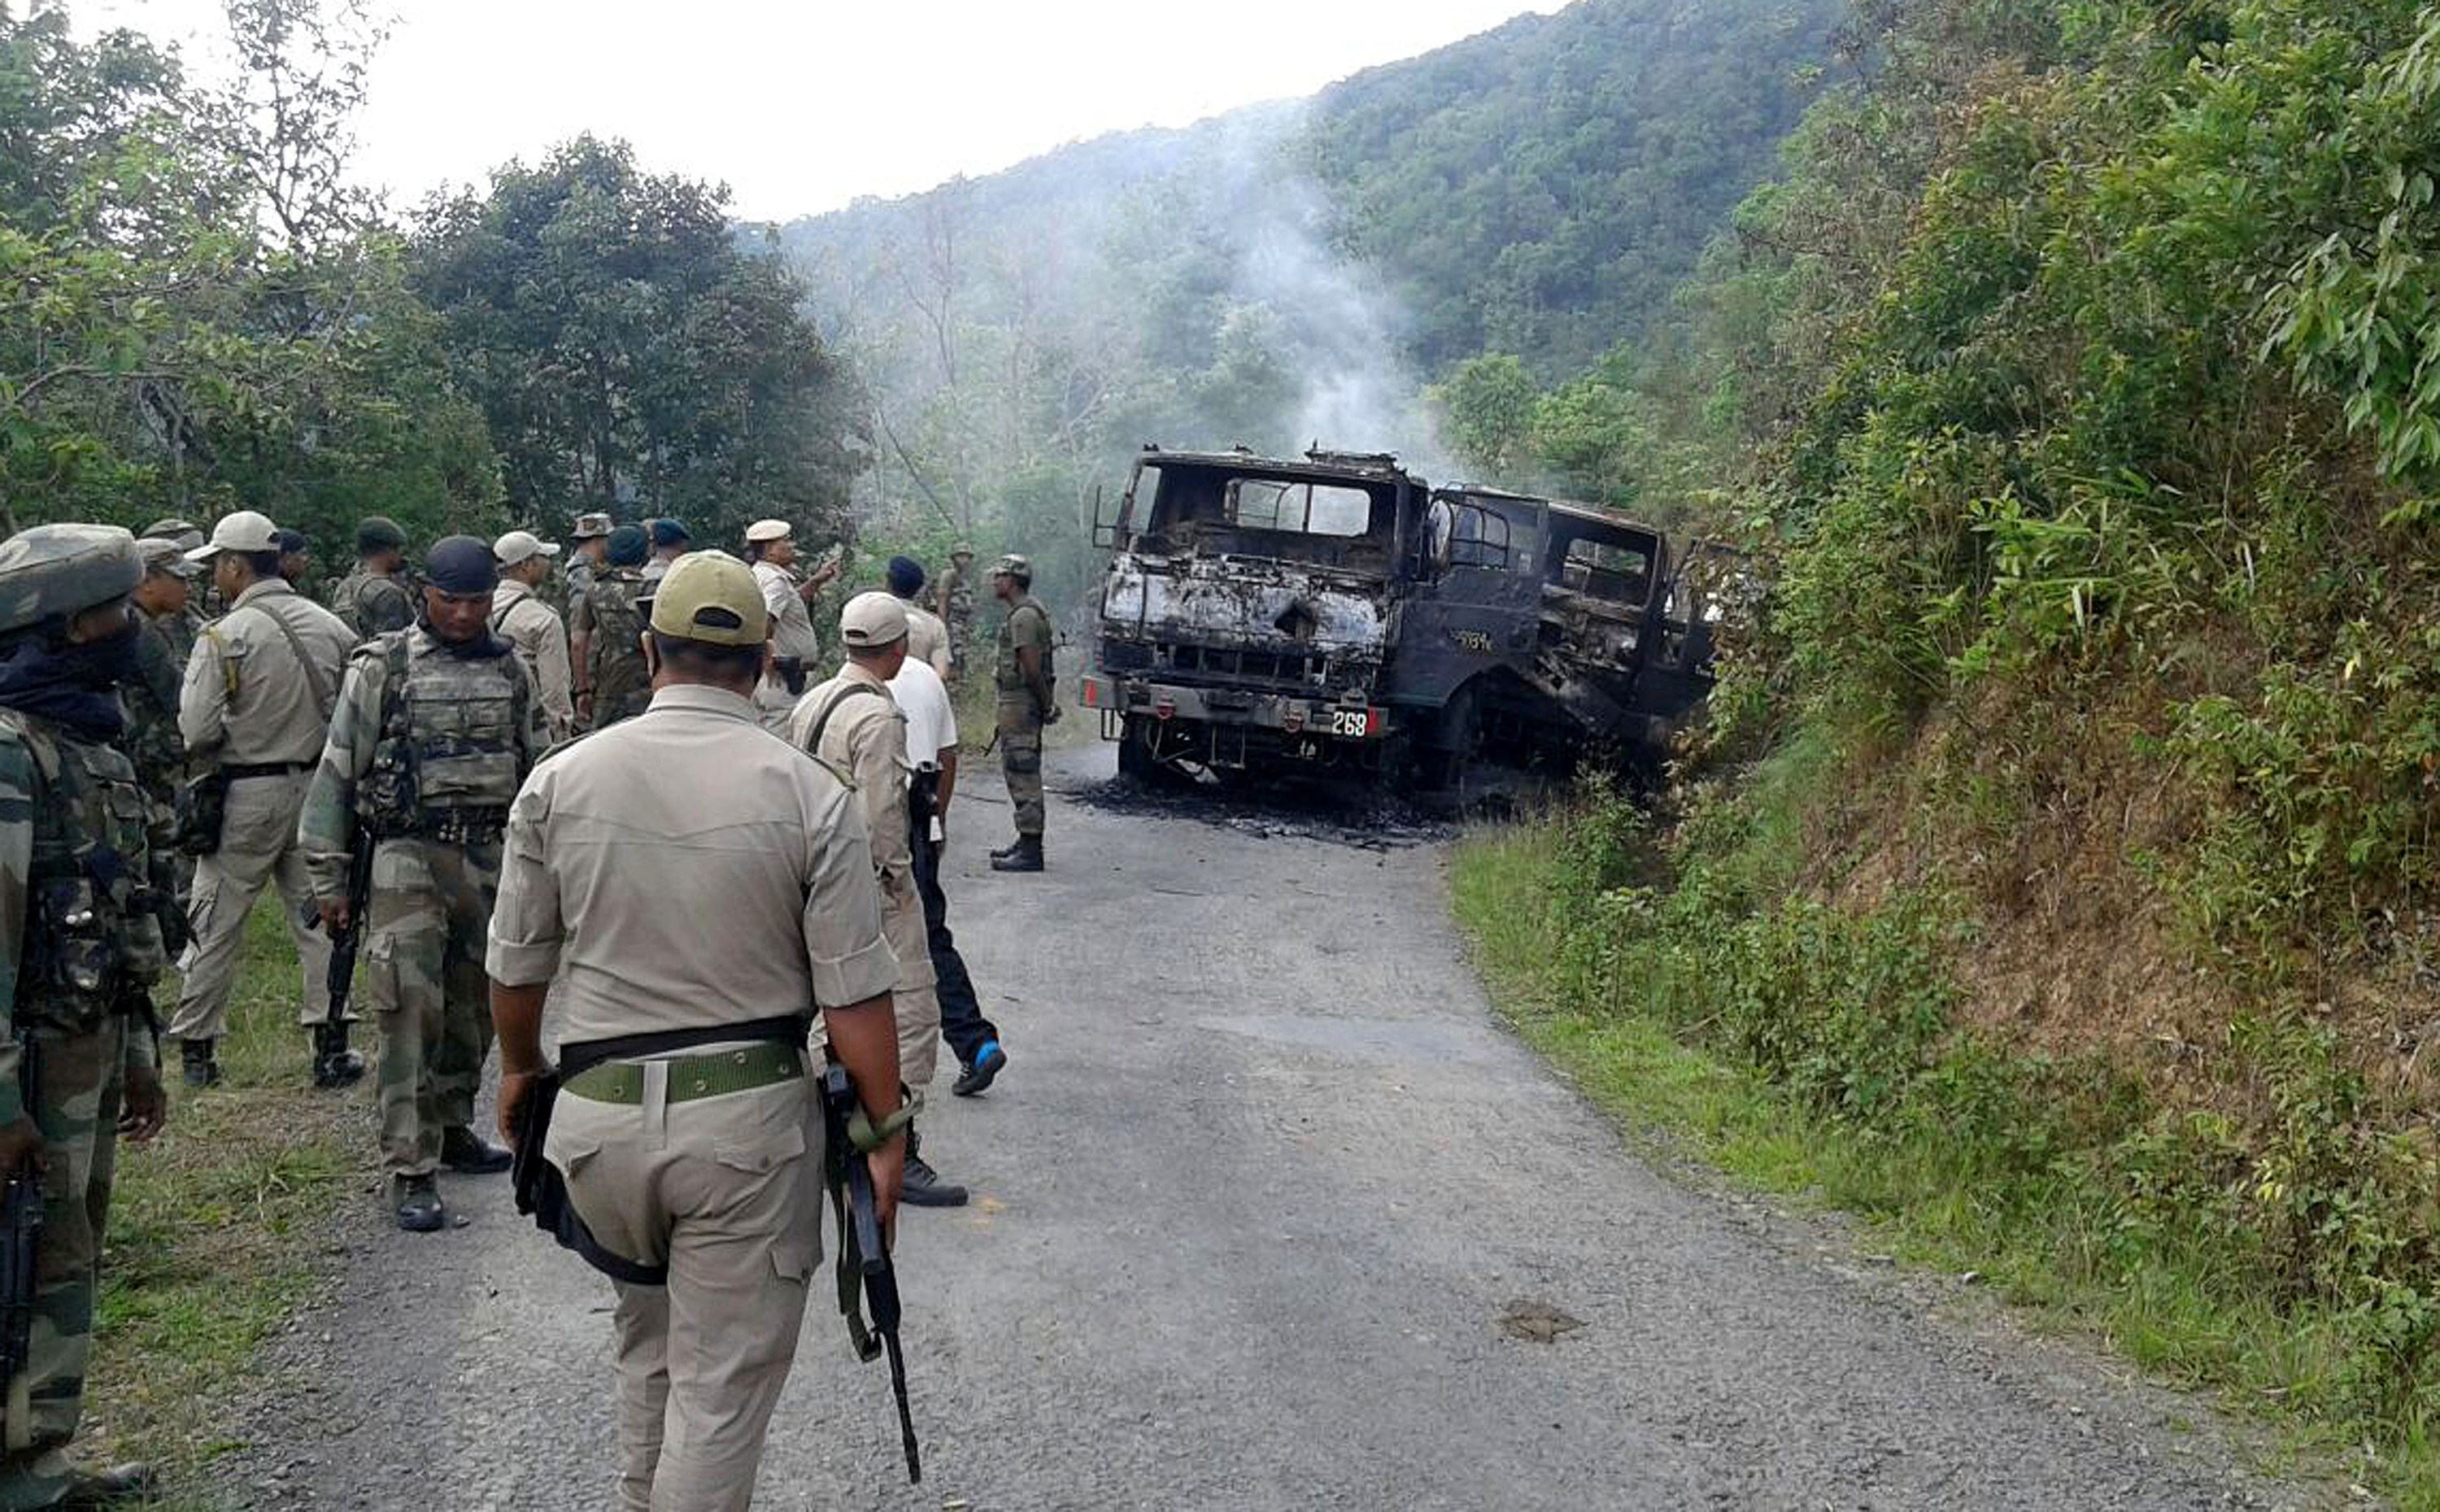 In this photograph taken on June 4, 2015, Indian security personnel stand alongside the smouldering vehicle wreckage at the scene of an attack on a military convoy in a remote area of Chandel district, about 120 kilometres (75 miles) southwest of northeastern Manipur's state capital Imphal. (STR—AFP/Getty Images)